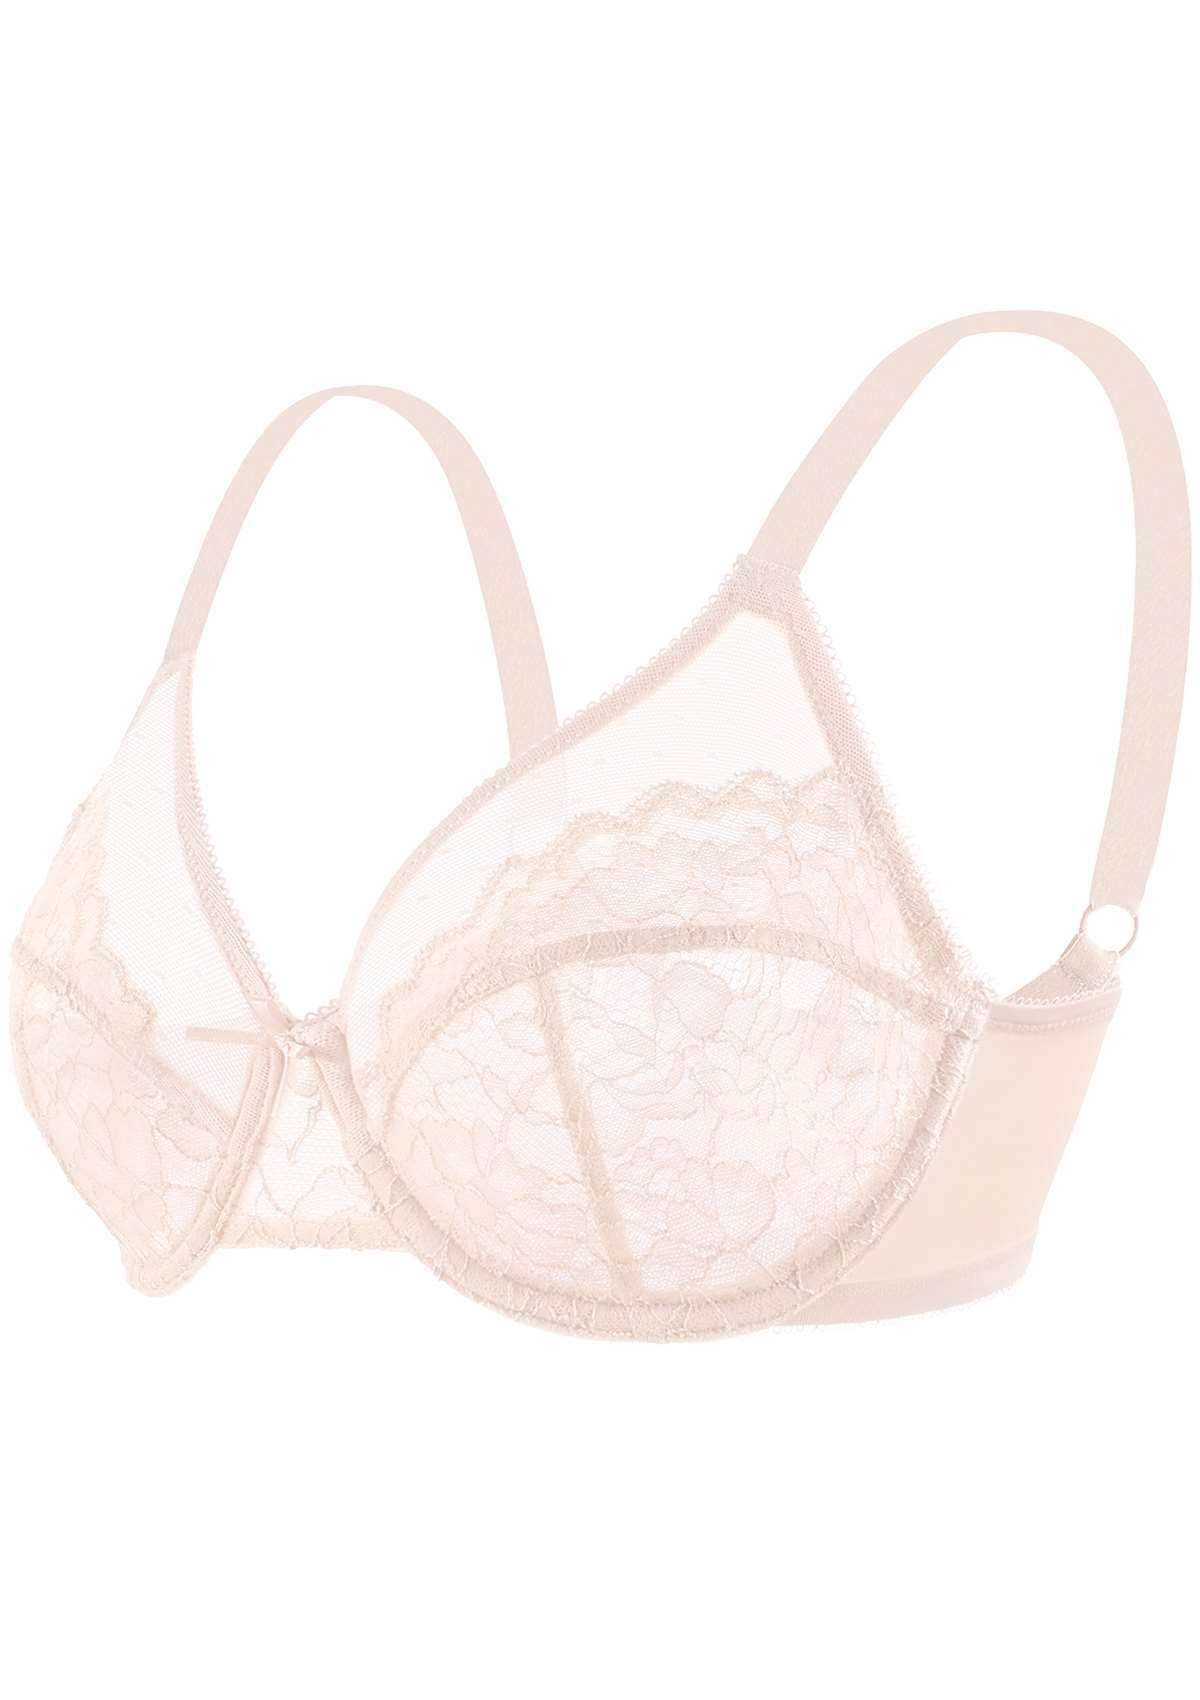 HSIA Enchante Lacy Bra: Comfy Sheer Lace Bra With Lift - Pink / 38 / DDD/F